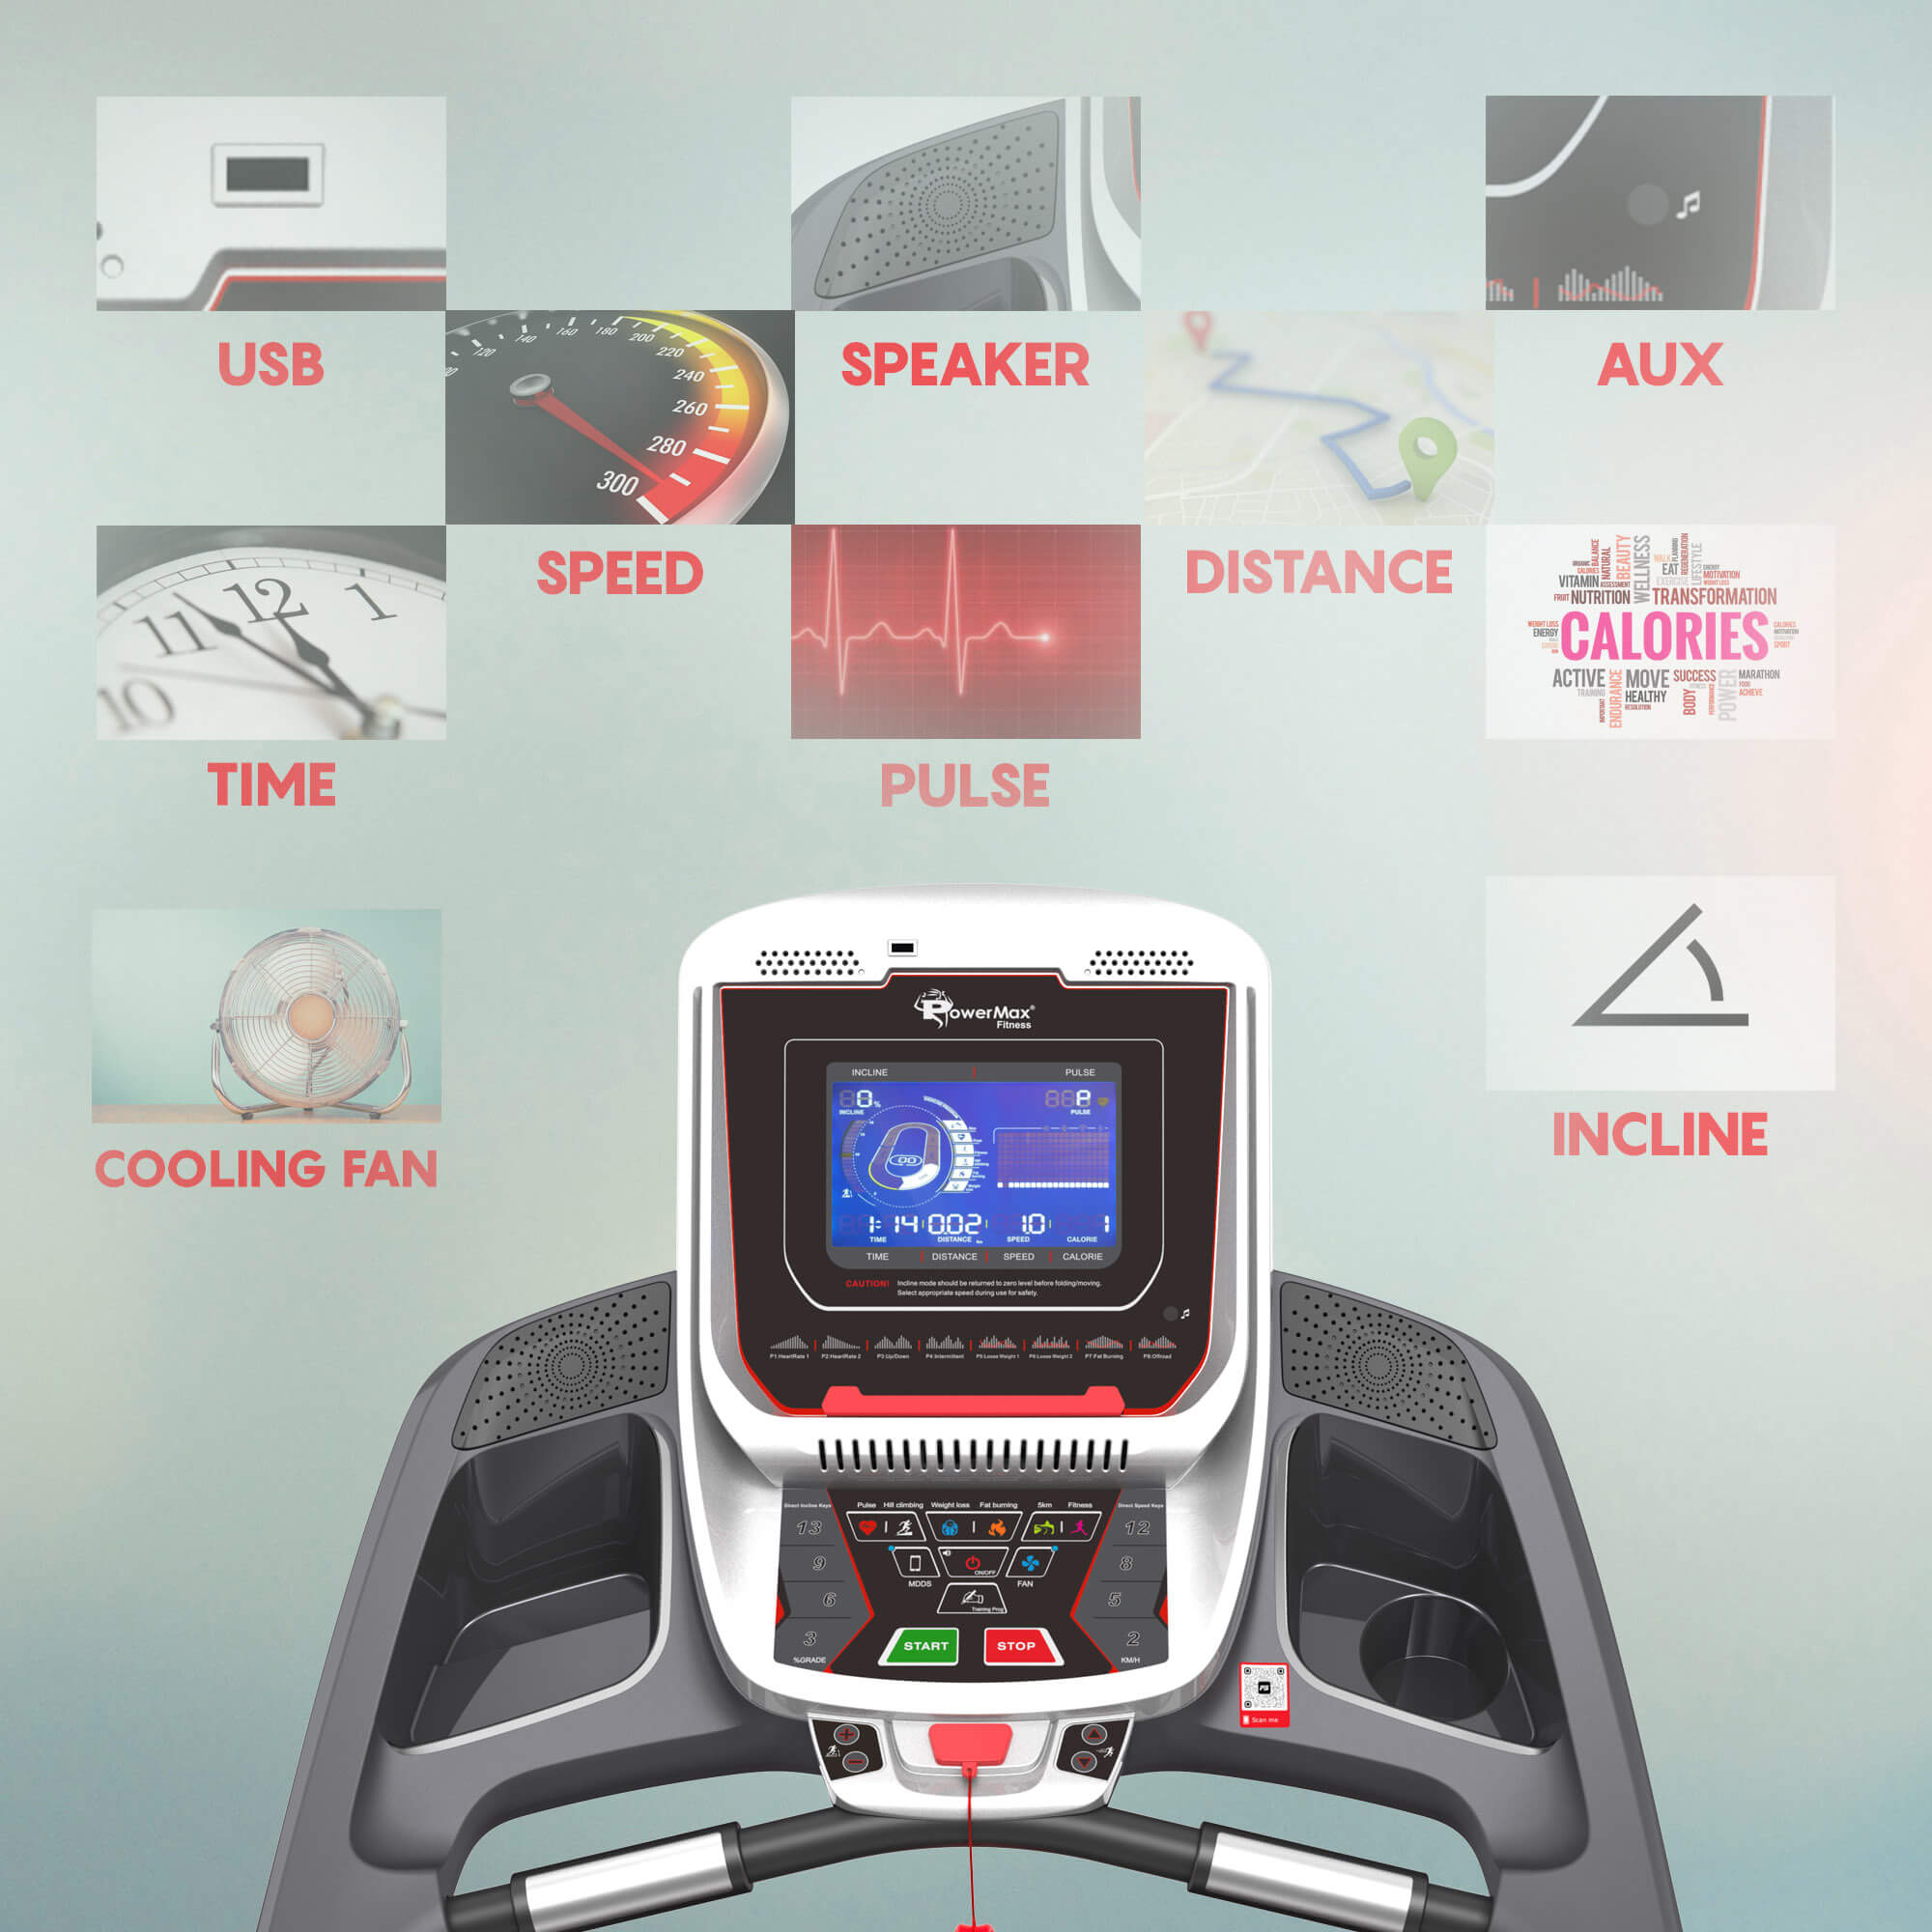 TAC-515 Commercial Motorized AC Treadmill with Android & iOS App